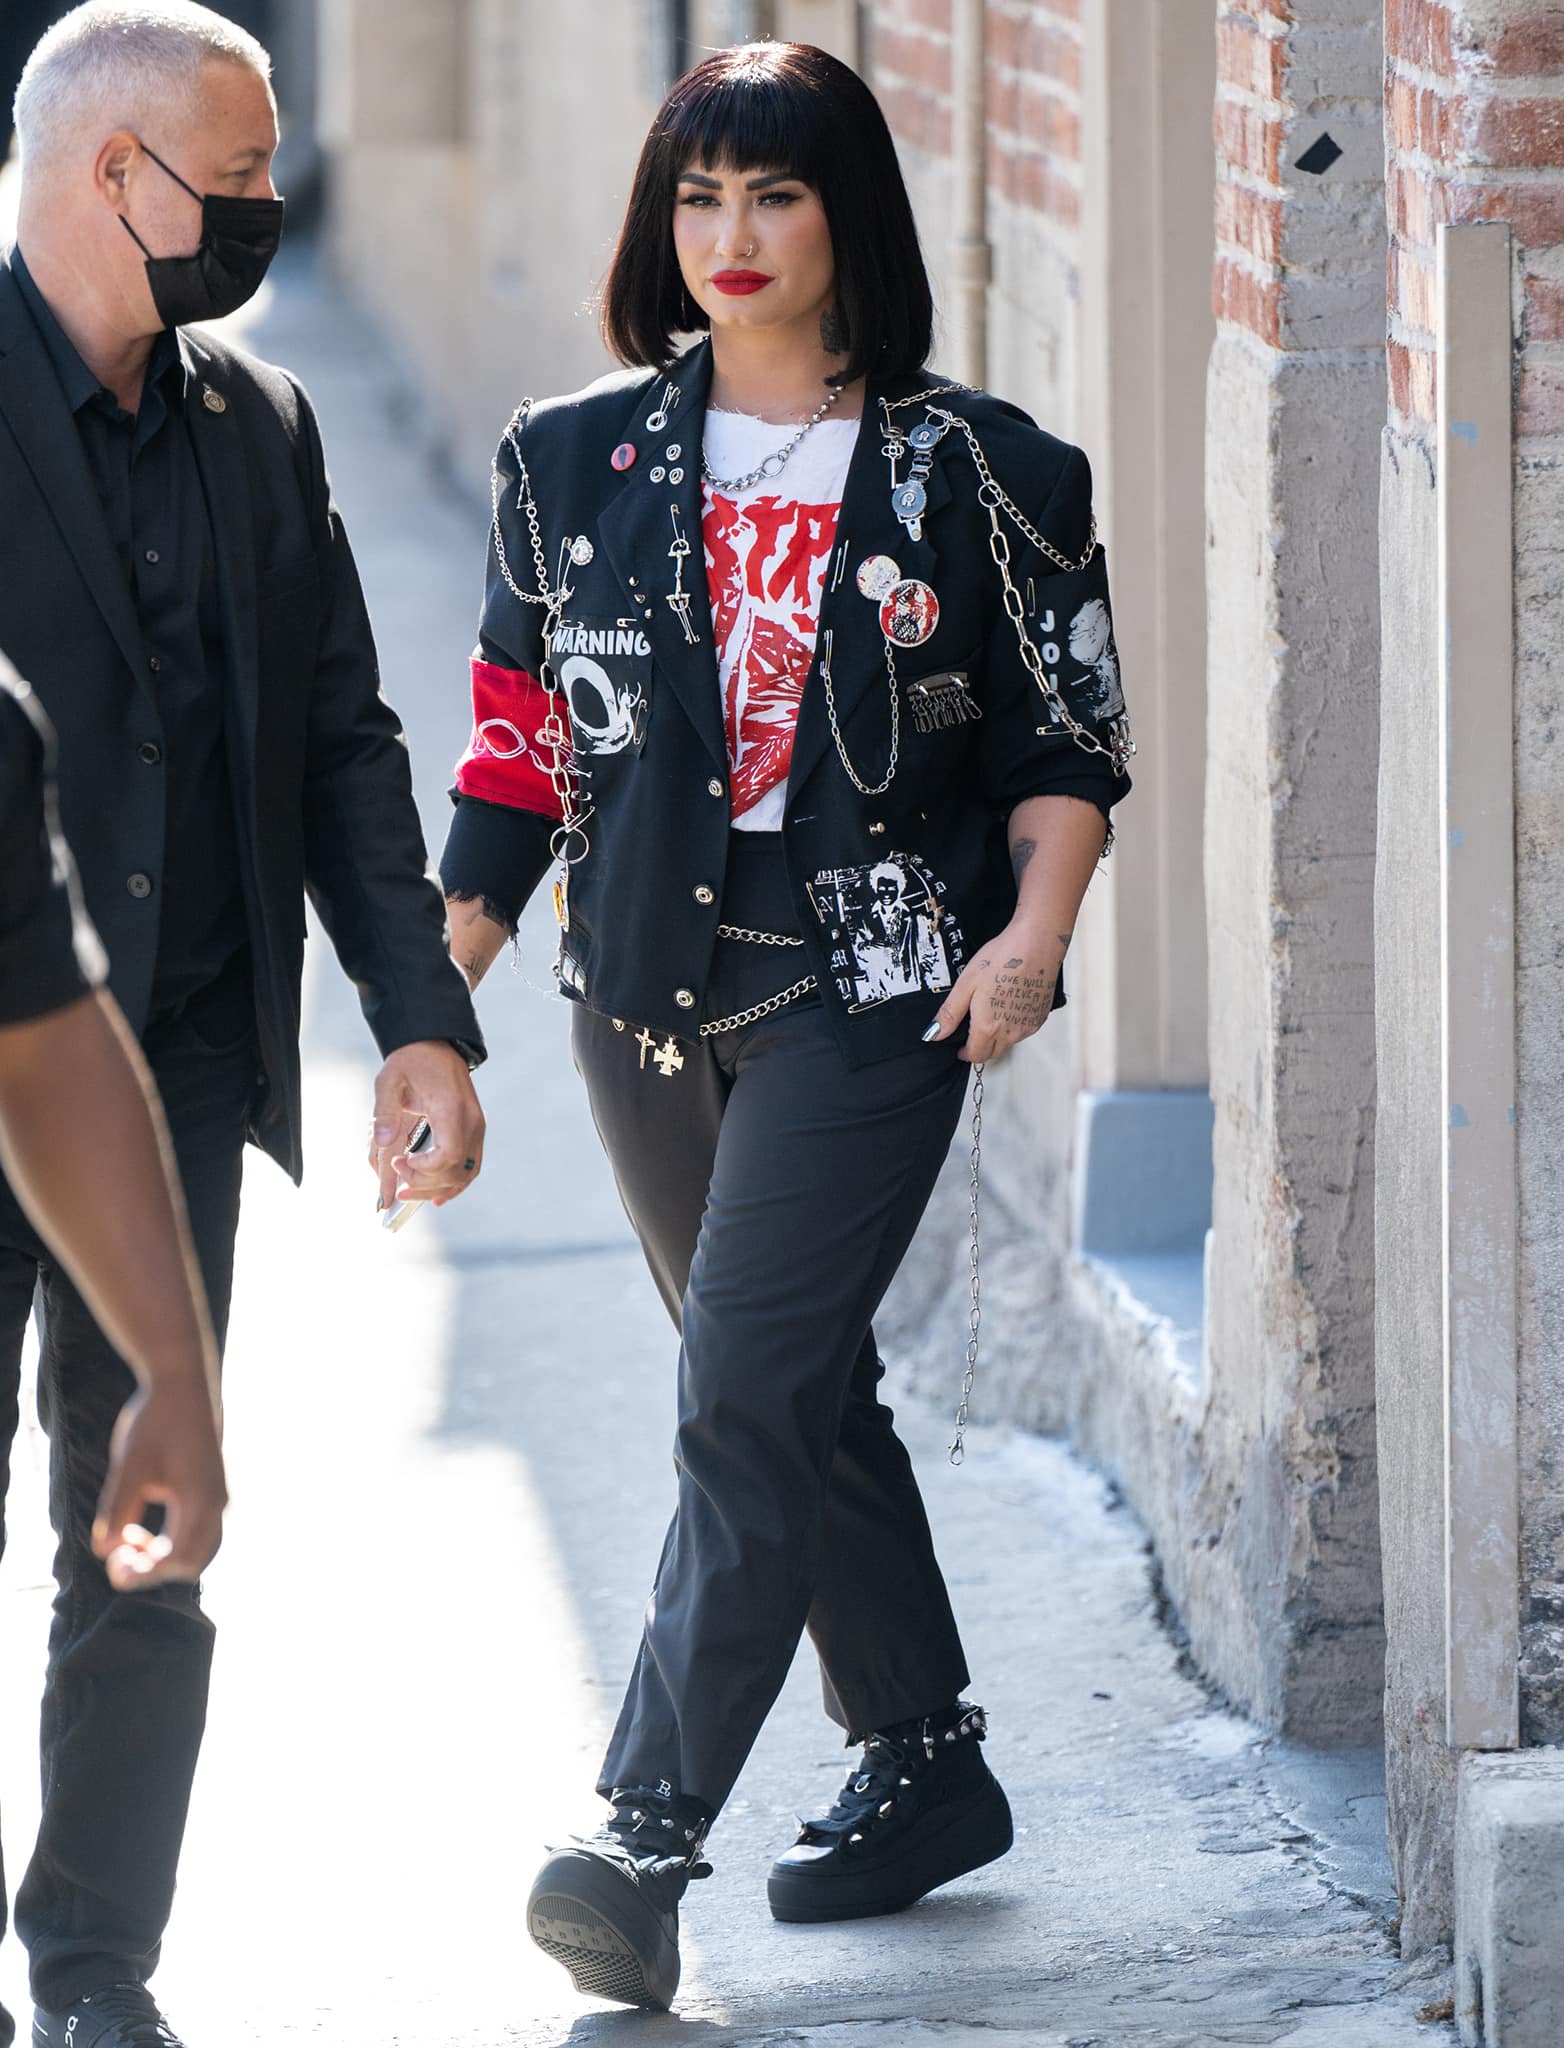 Demi Lovato opts for a rock-and-roll outfit in a graphic tee, studded jacket, matching sneakers, and black trousers